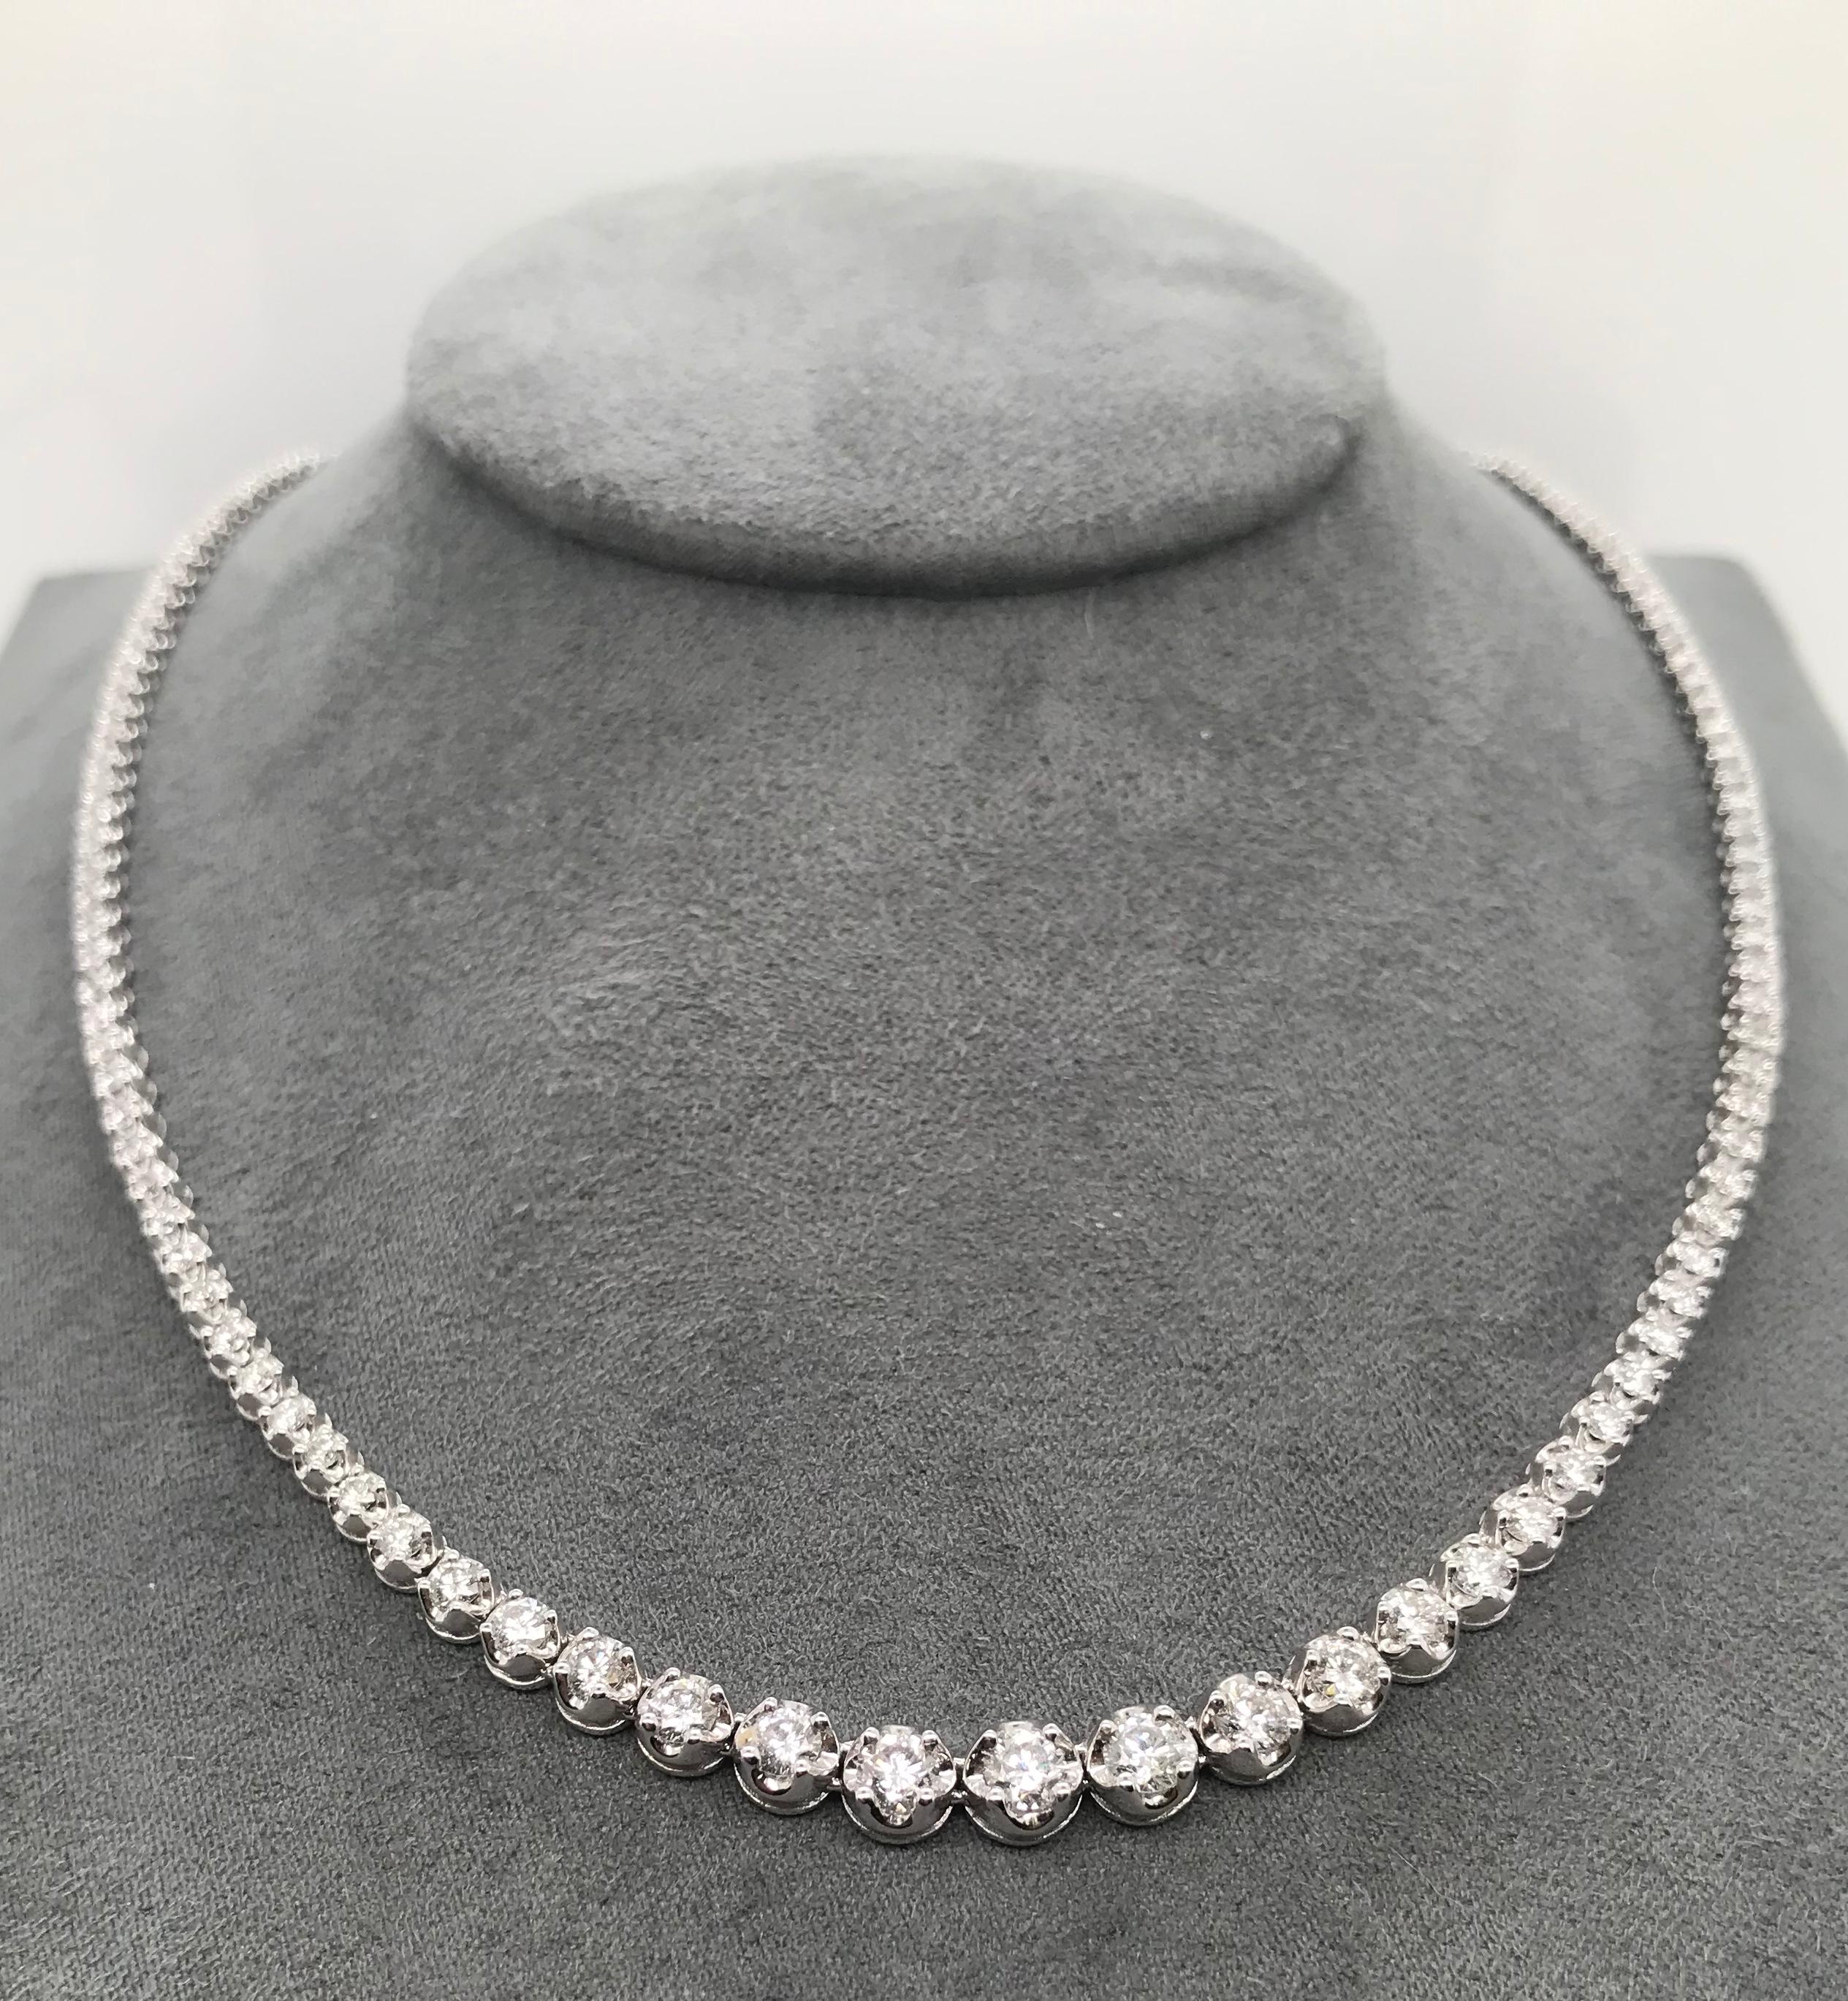 Diamond River Necklaces 
Composed of a line of Round cut diamonds, mounted in White gold 18K
L.: 38 cm
158 White Diamonds 3.000 Ct color H purity SI
White Gold 15,90 Grams